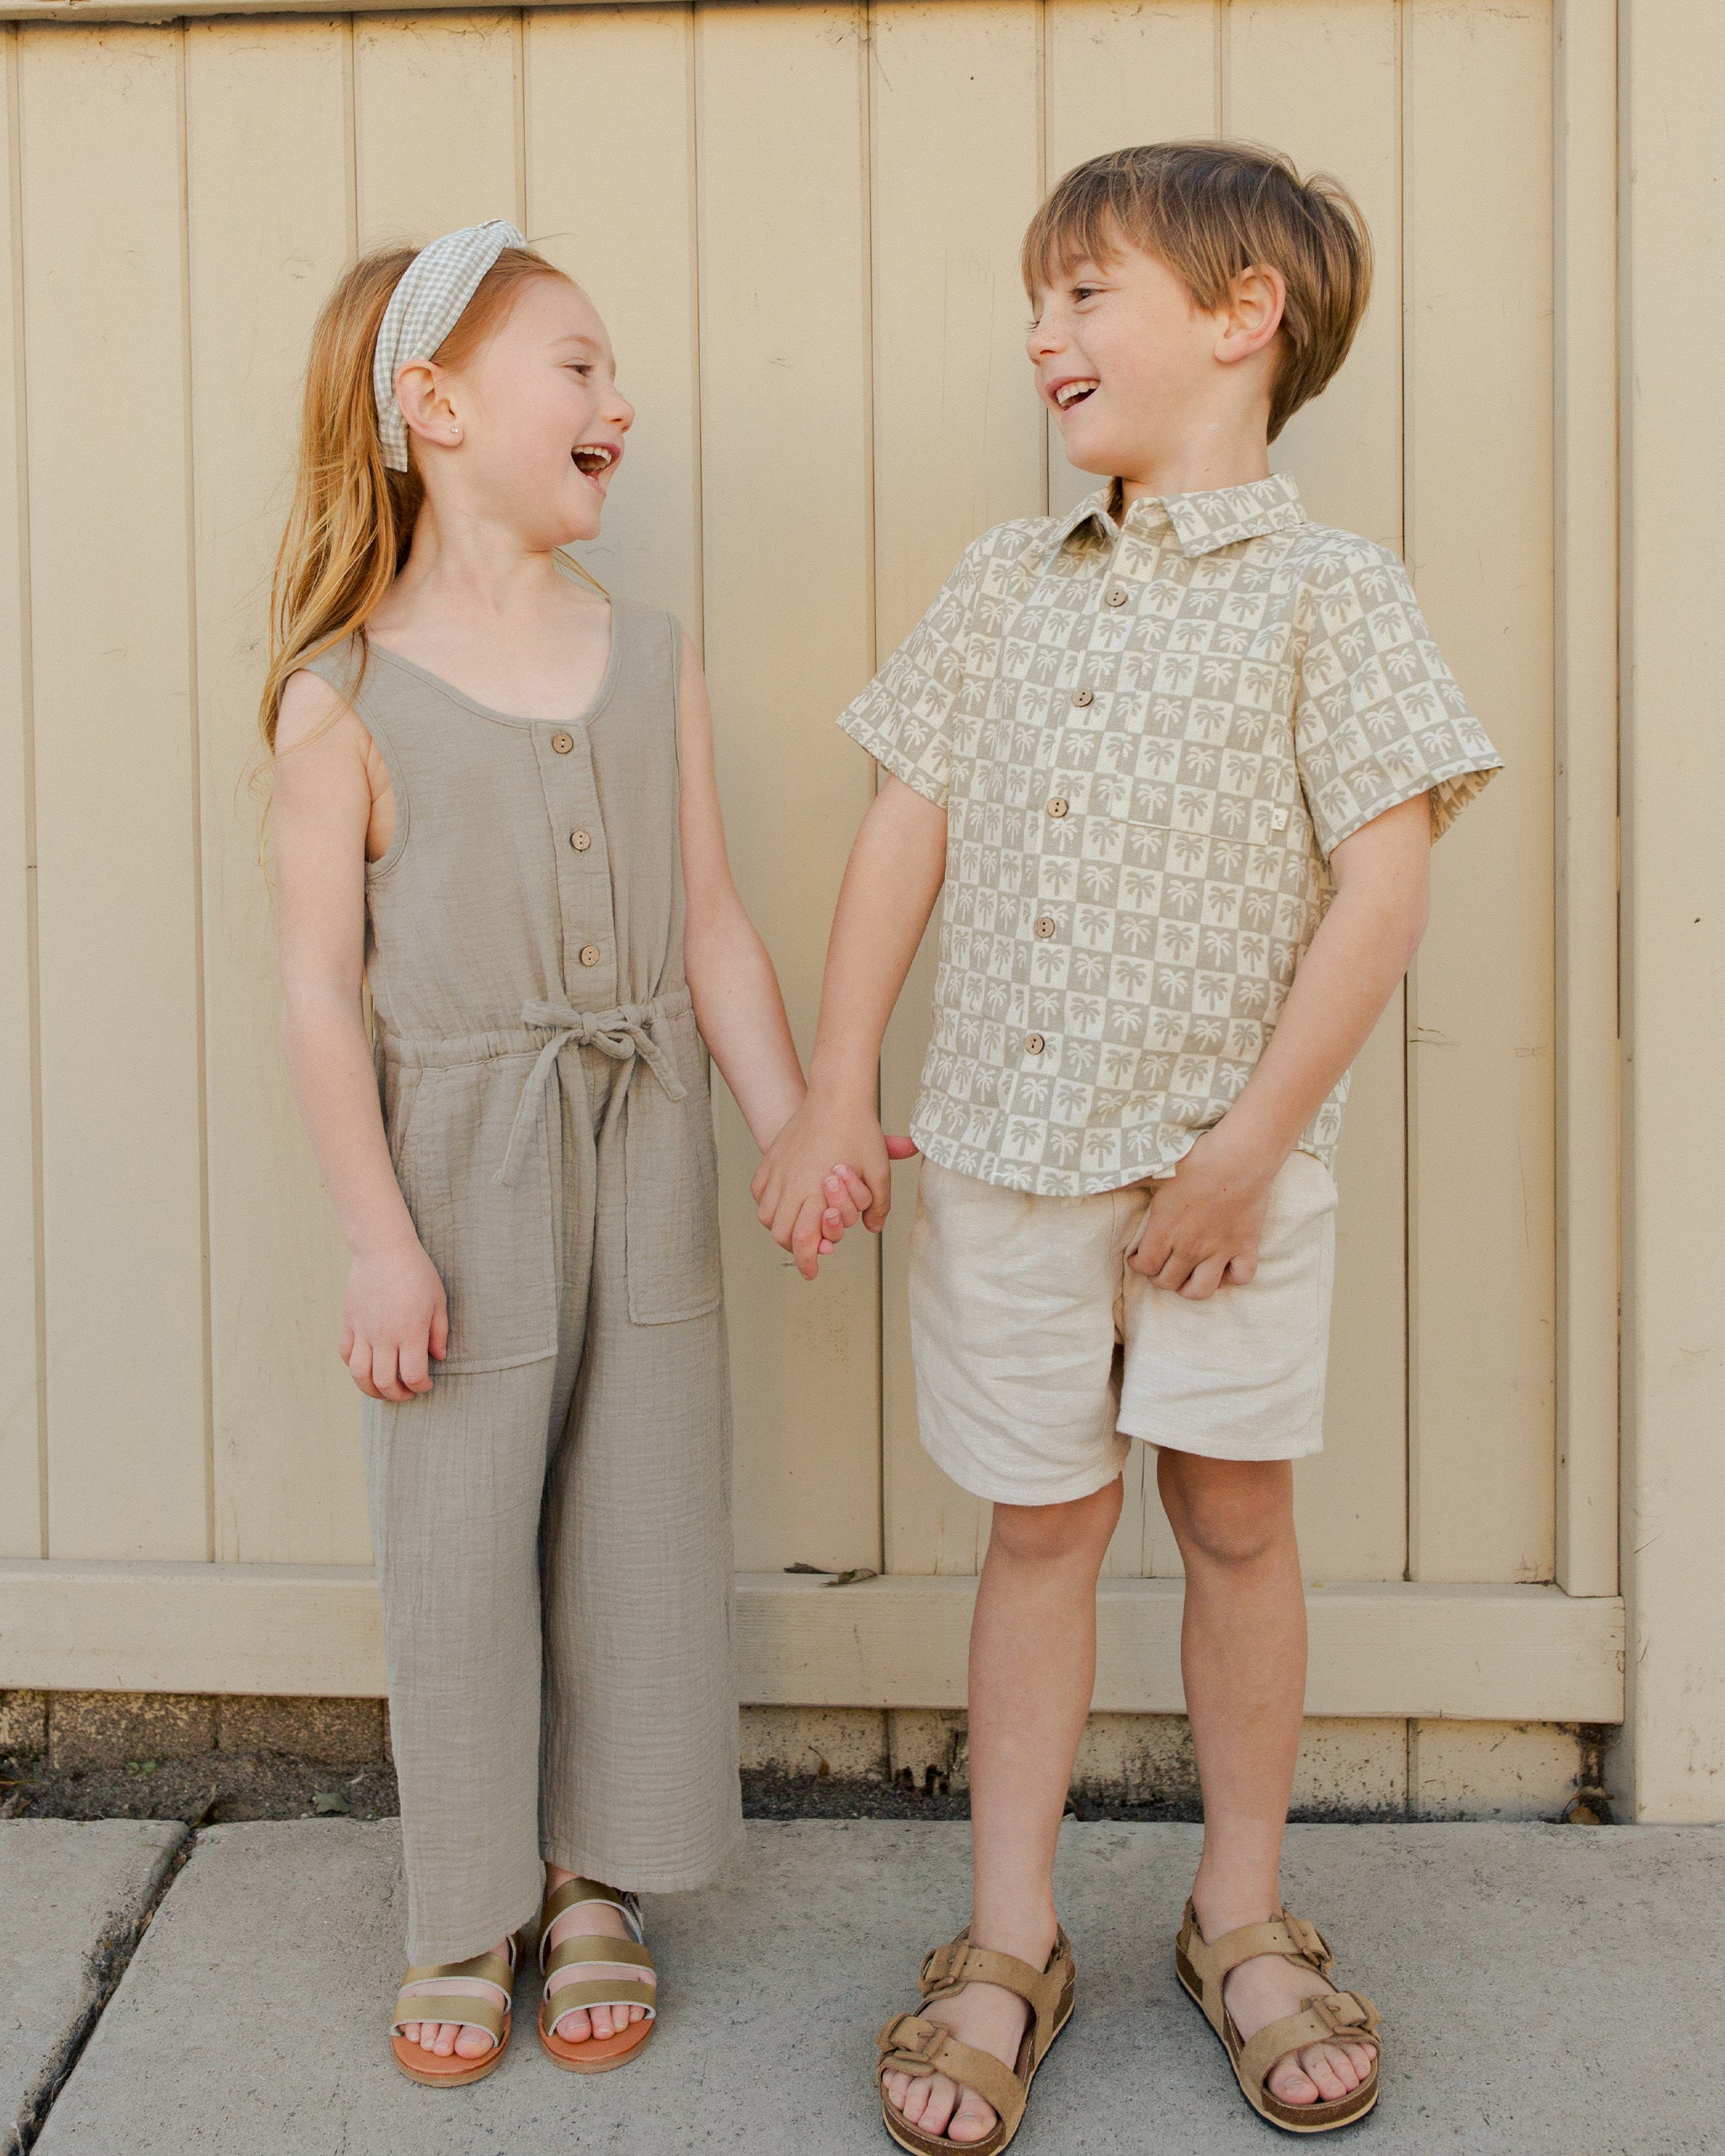 The leading children's fashion and family lifestyle